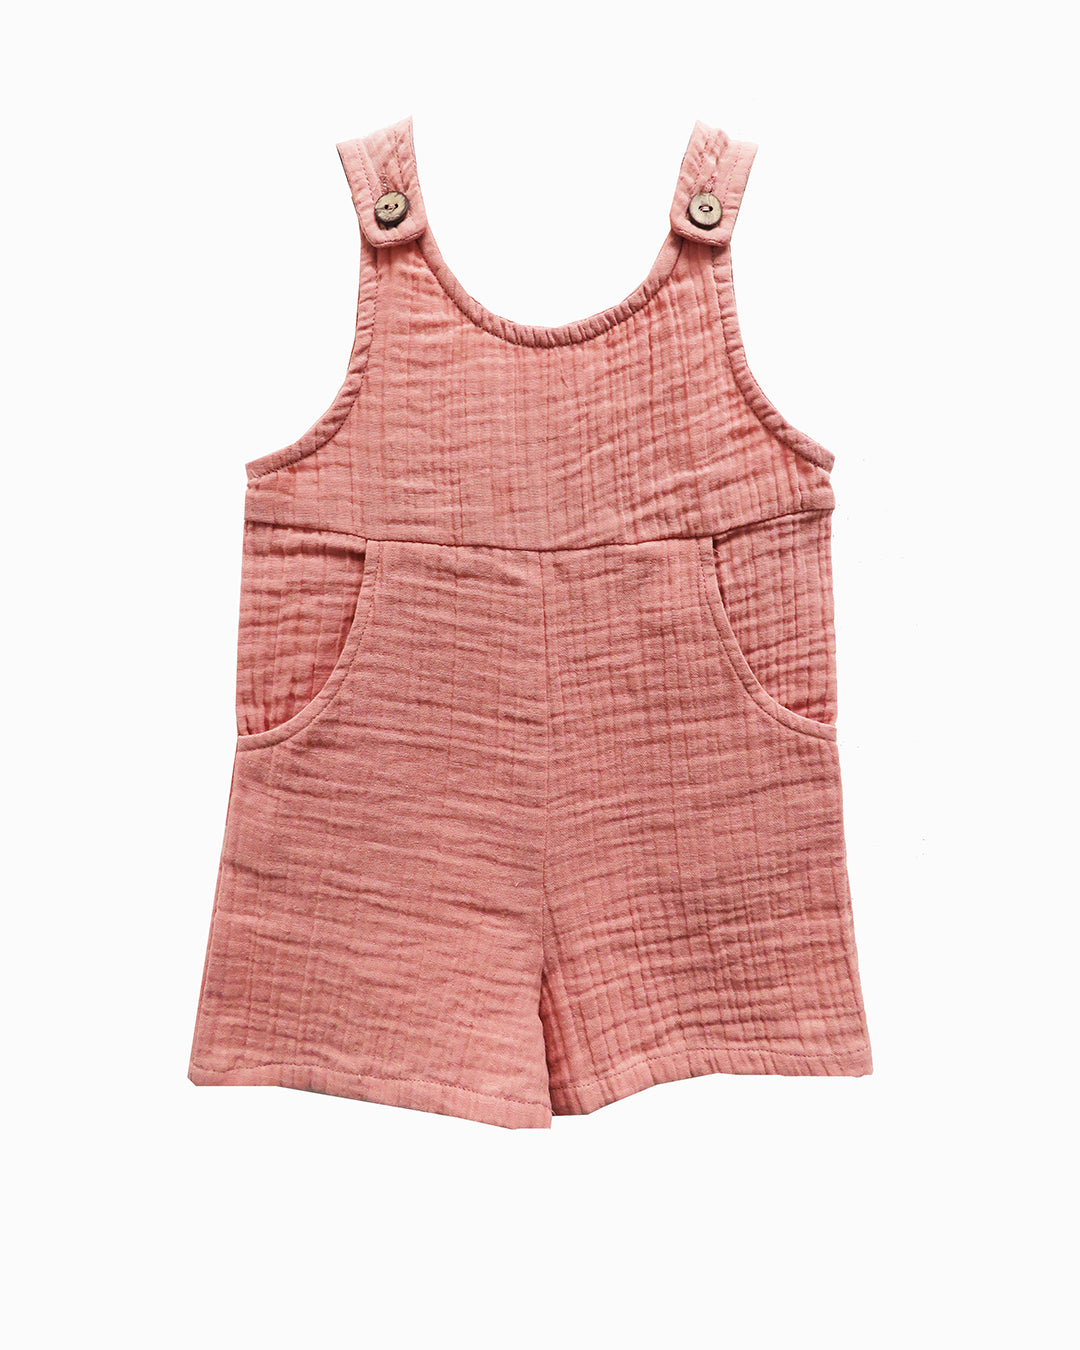 Dusty Pink Sleevless Romper Suit In Soft Cotton Double Weave With Pockets